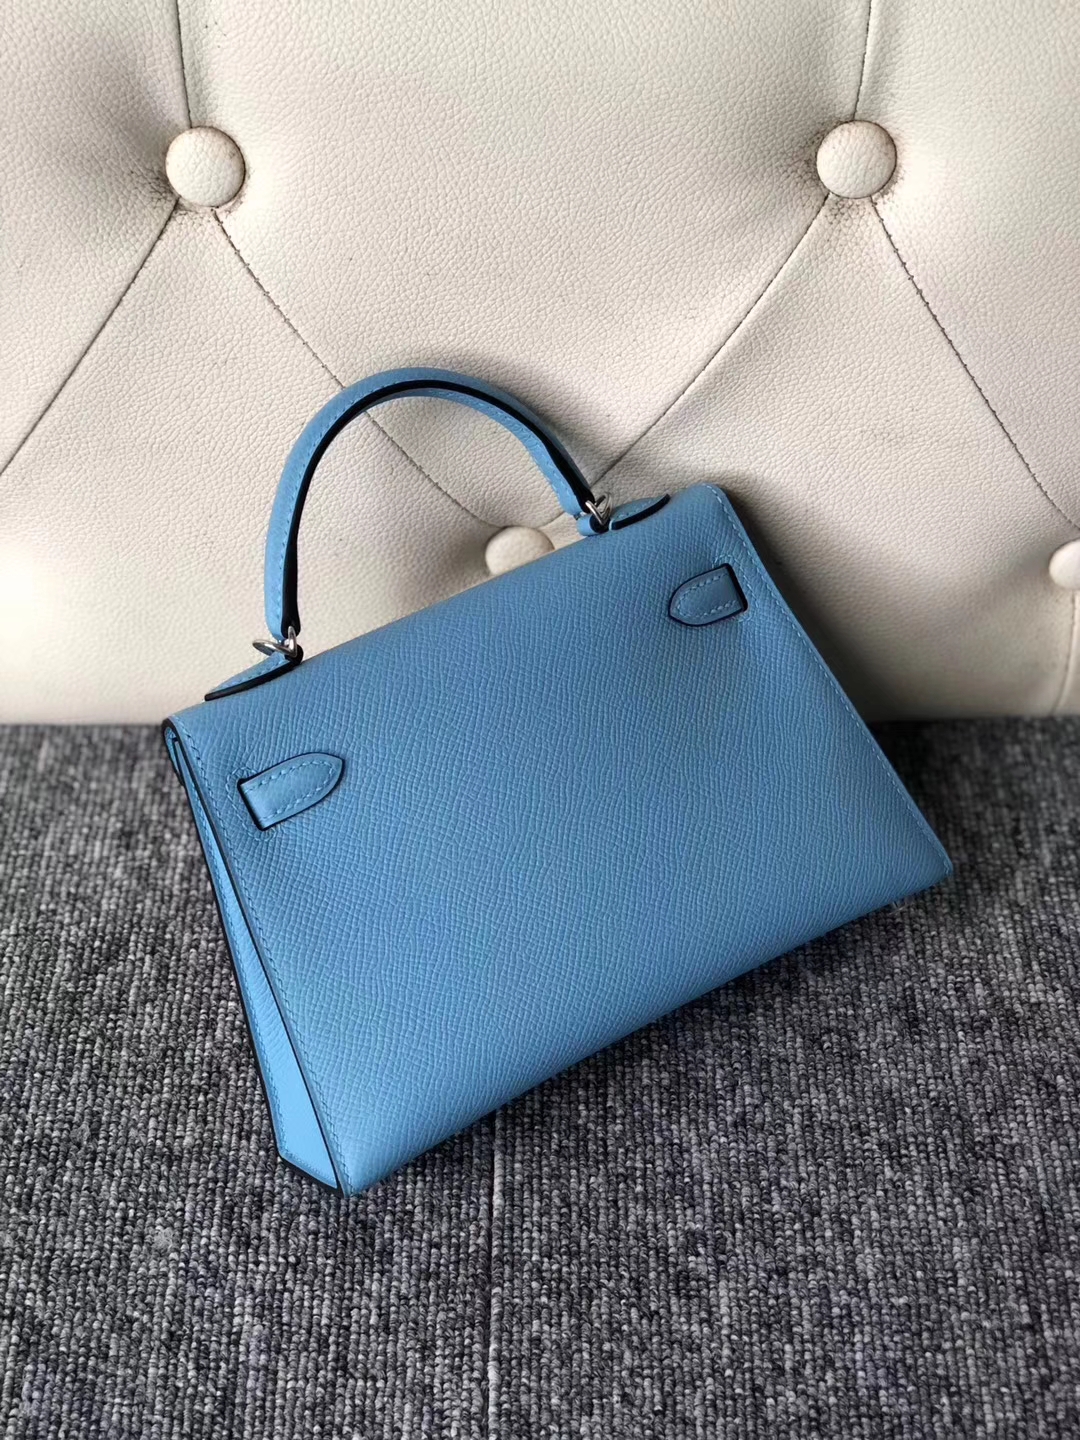 Fashion Hermes Epsom Calf Minikelly-2 Evening Bag in P3 Blue de Nord Silver Hardware